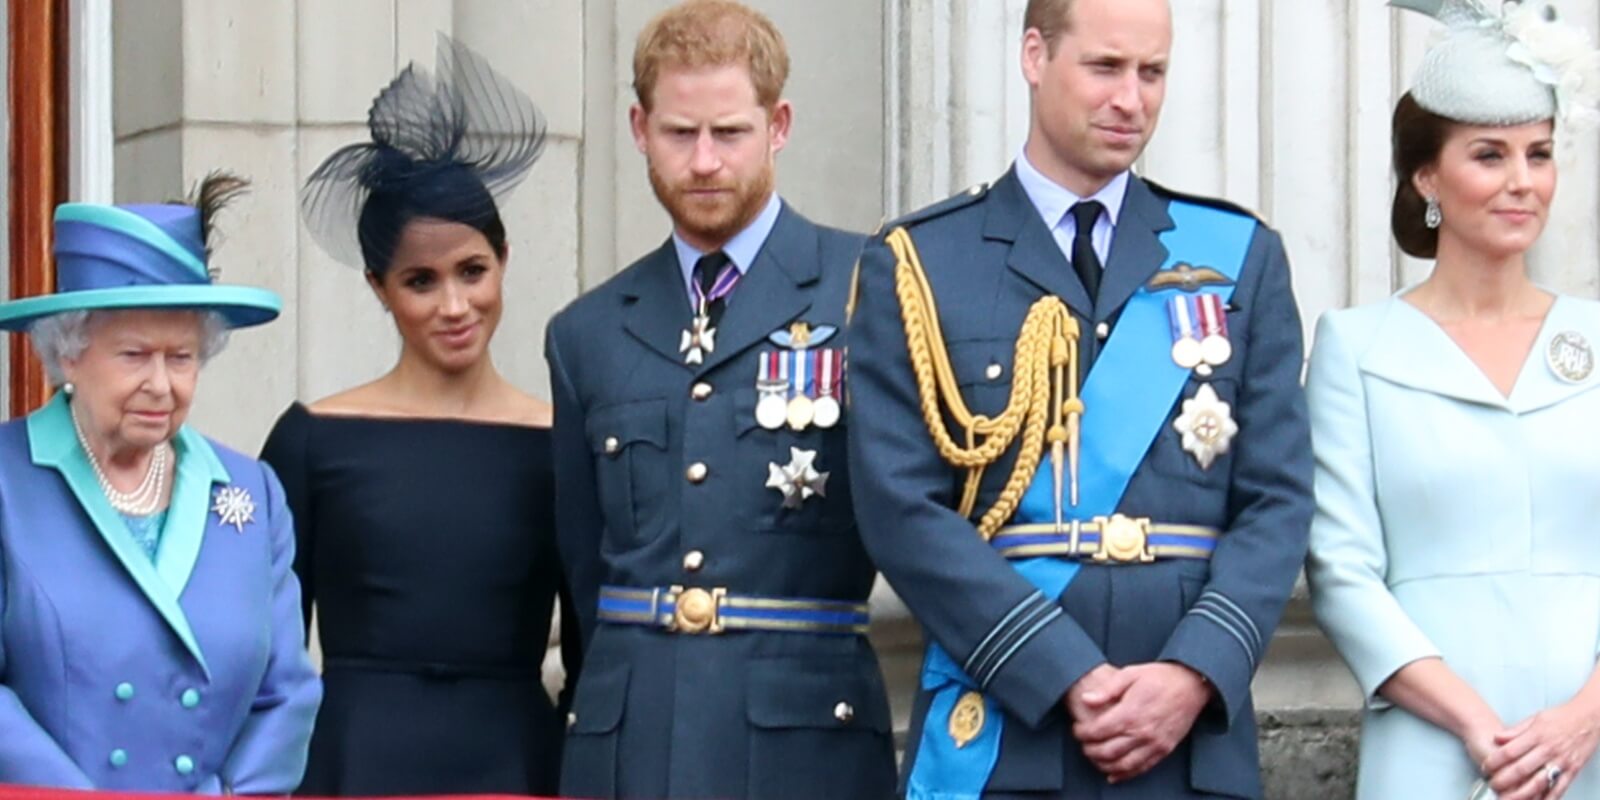 Queen Elizabeth, Meghan Markle, Prince Harry, Prince William and Kate Middleton pose on the Buckingham Palace balcony in June 2018.